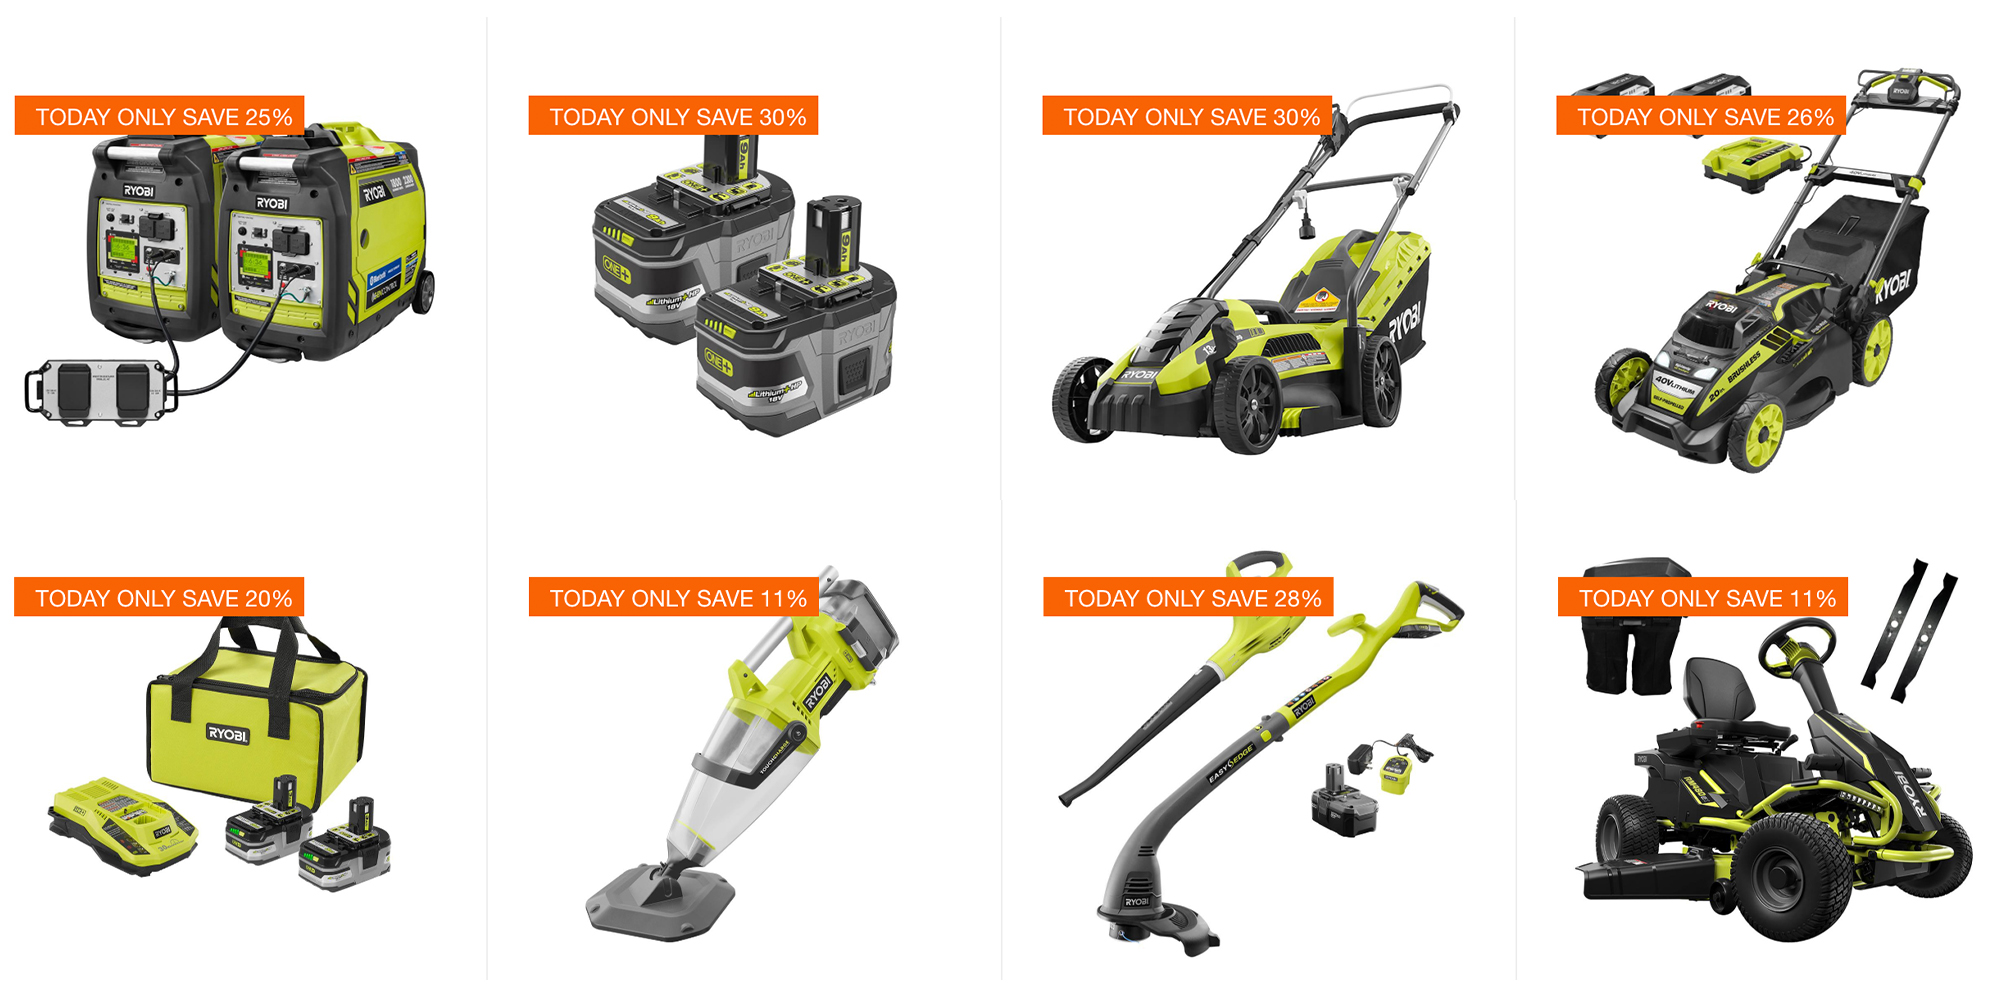 Save on Ryobi power tools, lawn mowers and more today only with deals